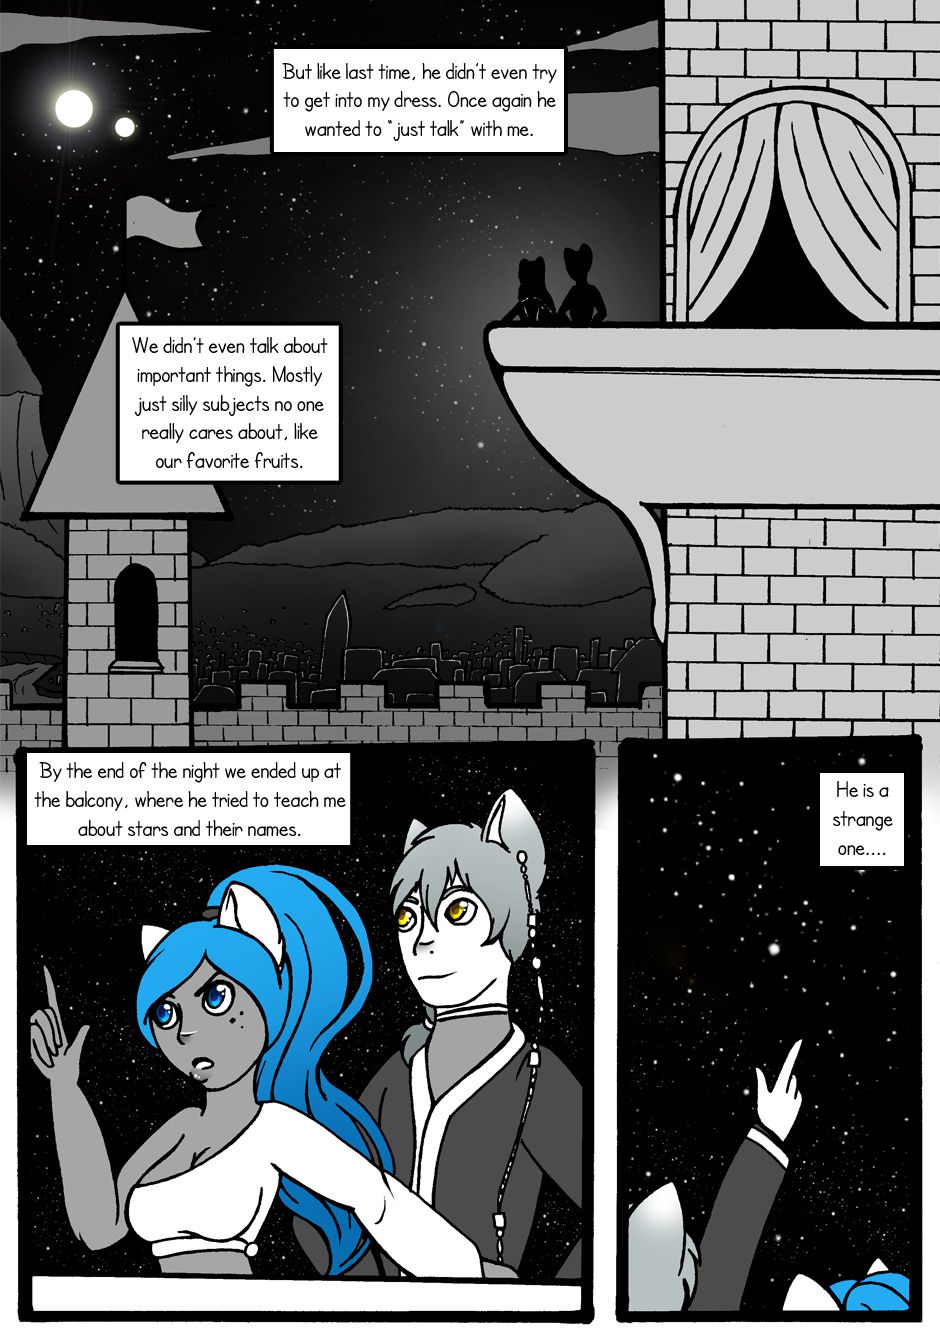 [Jeny-jen94] Between Kings and Queens [Ongoing] 49